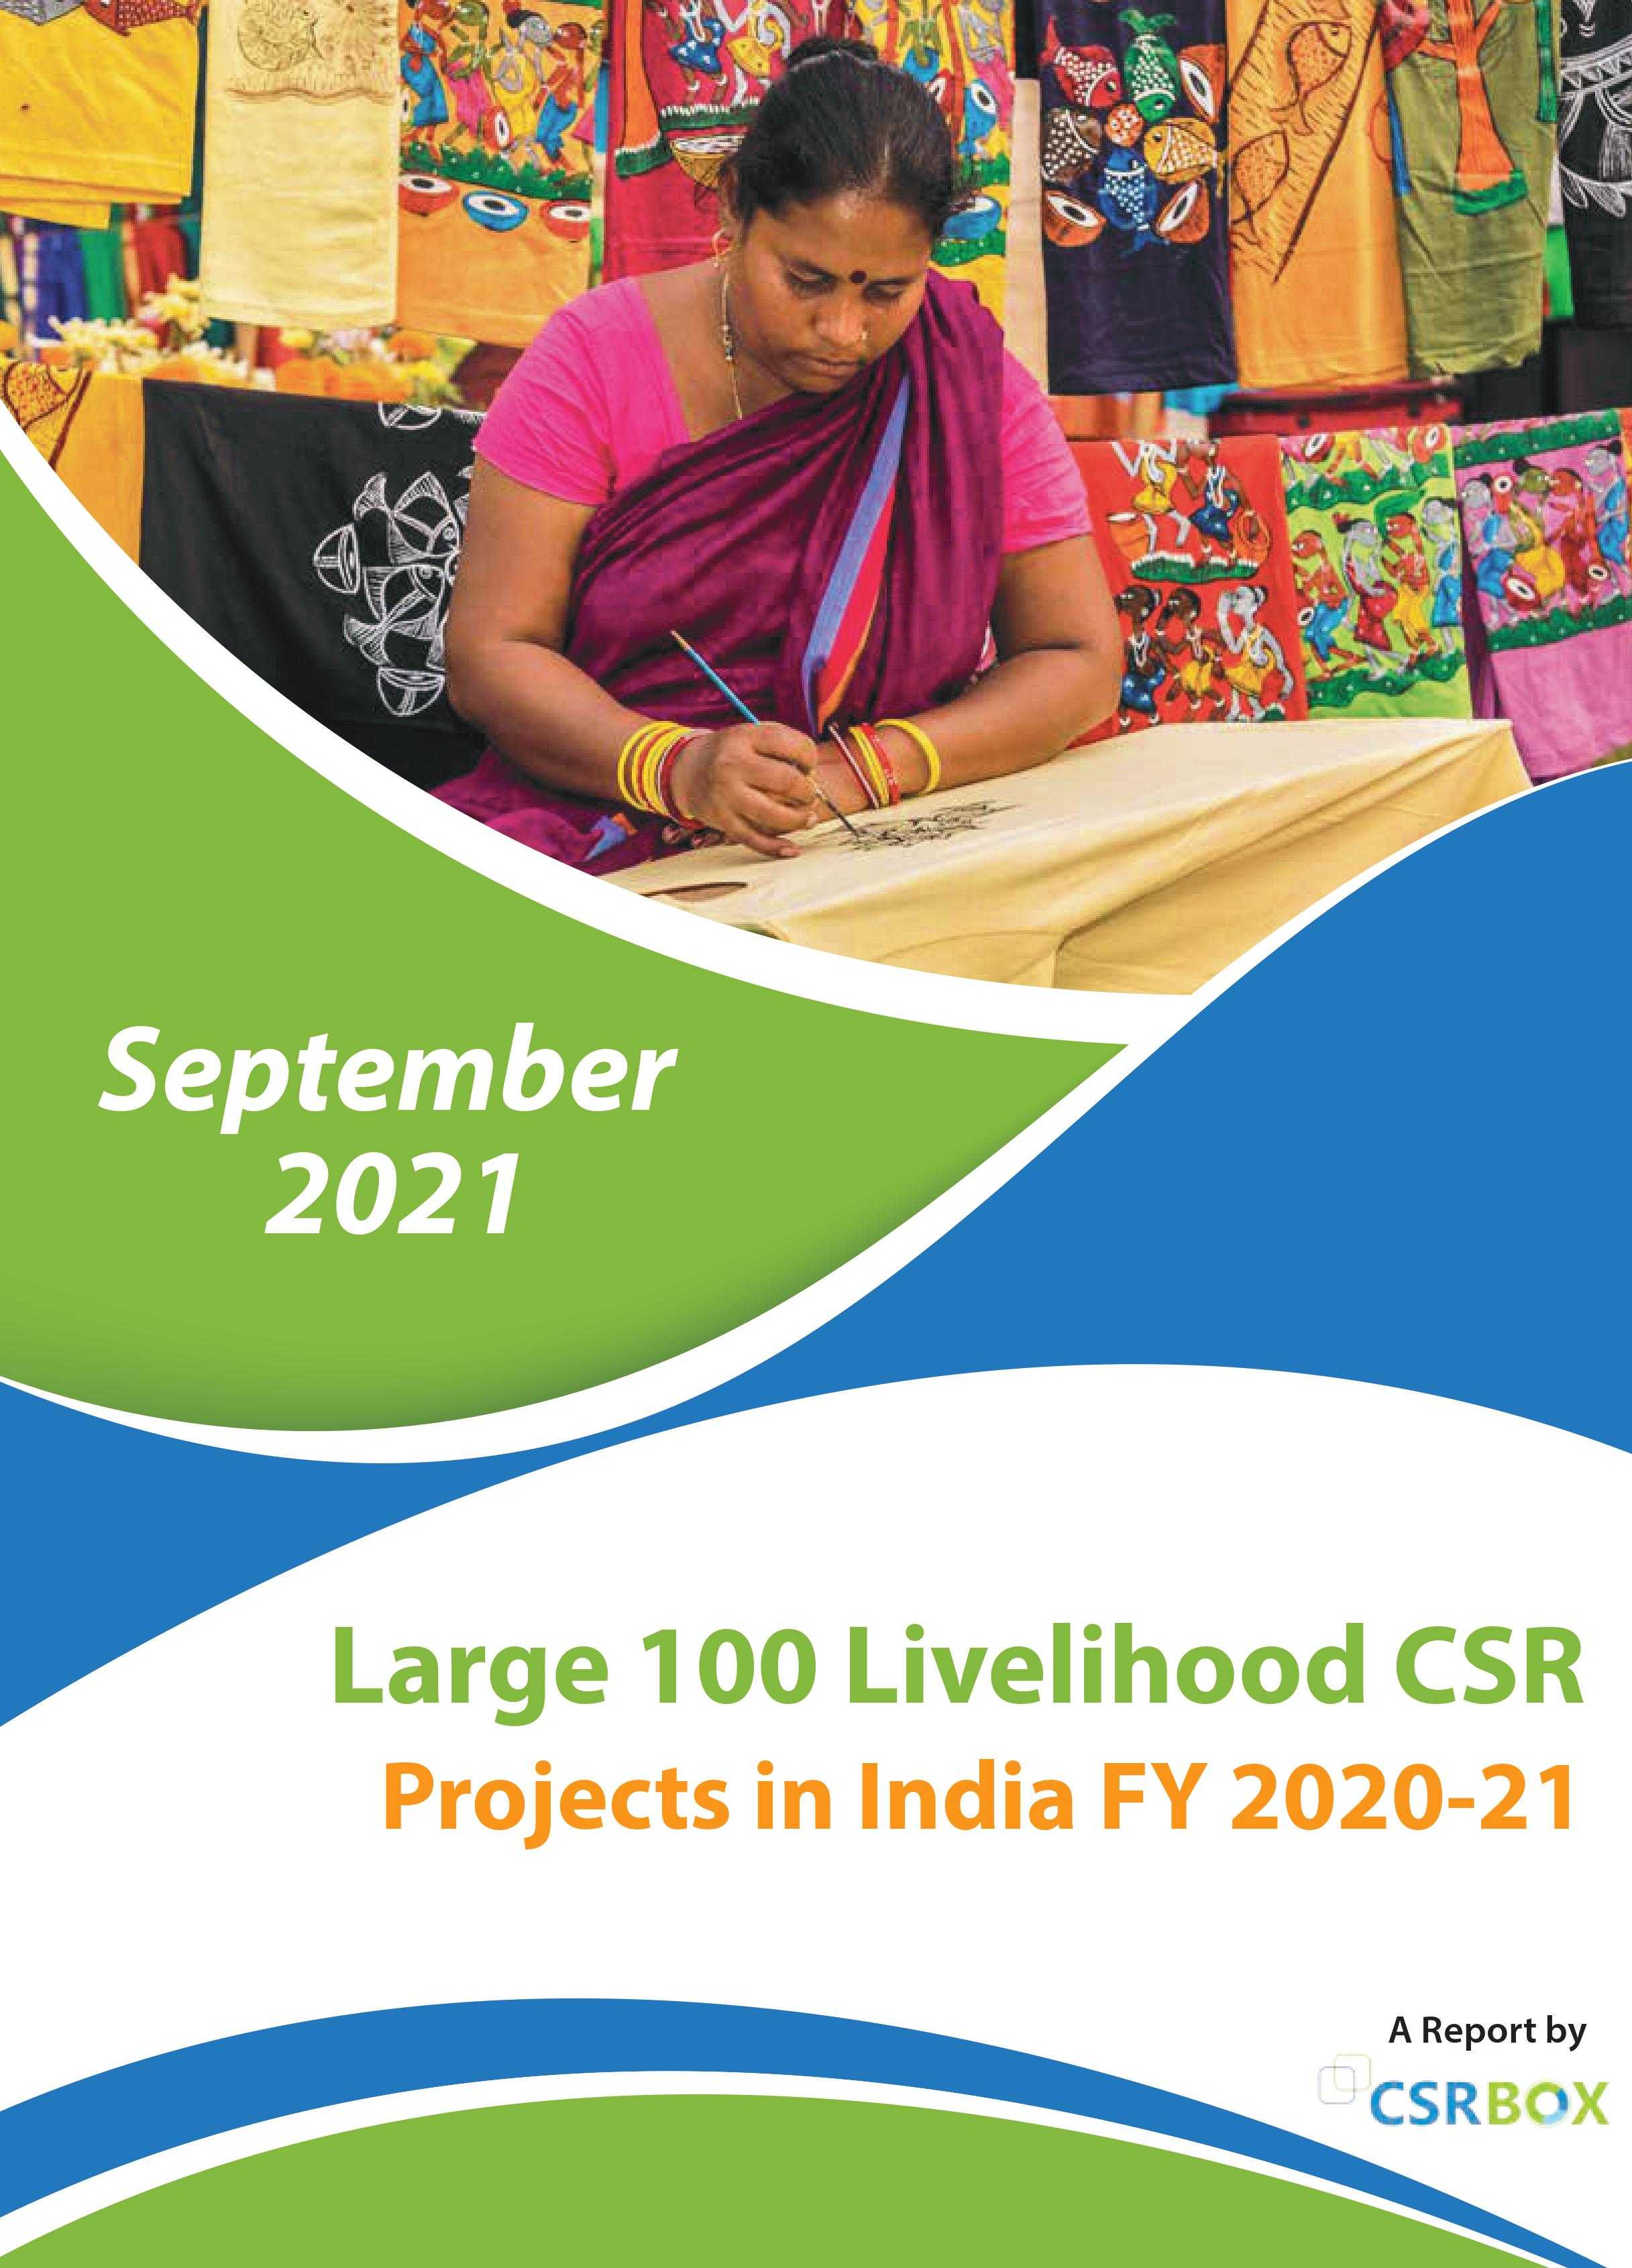 Large 100 Livelihood CSR Projects in India FY 2020-21